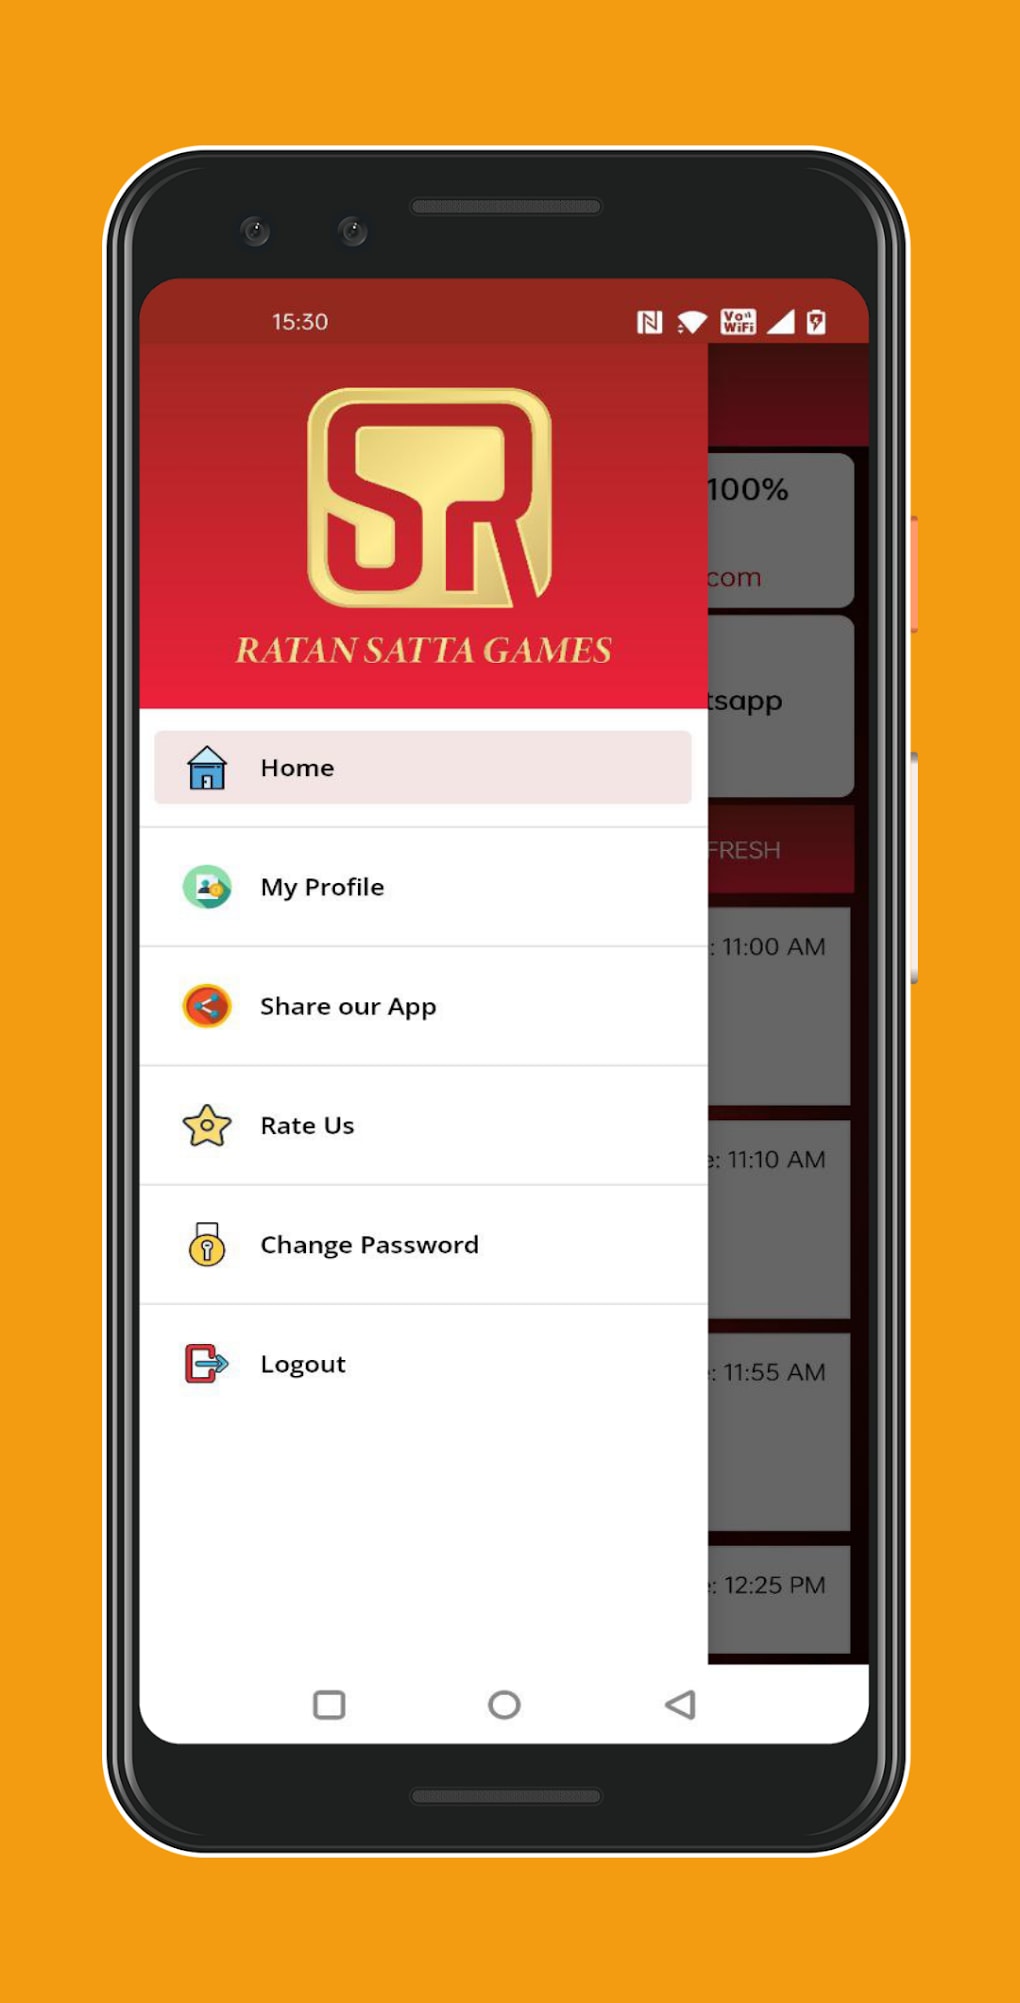 24x7 Matka-Online Satta Play for Android - Download